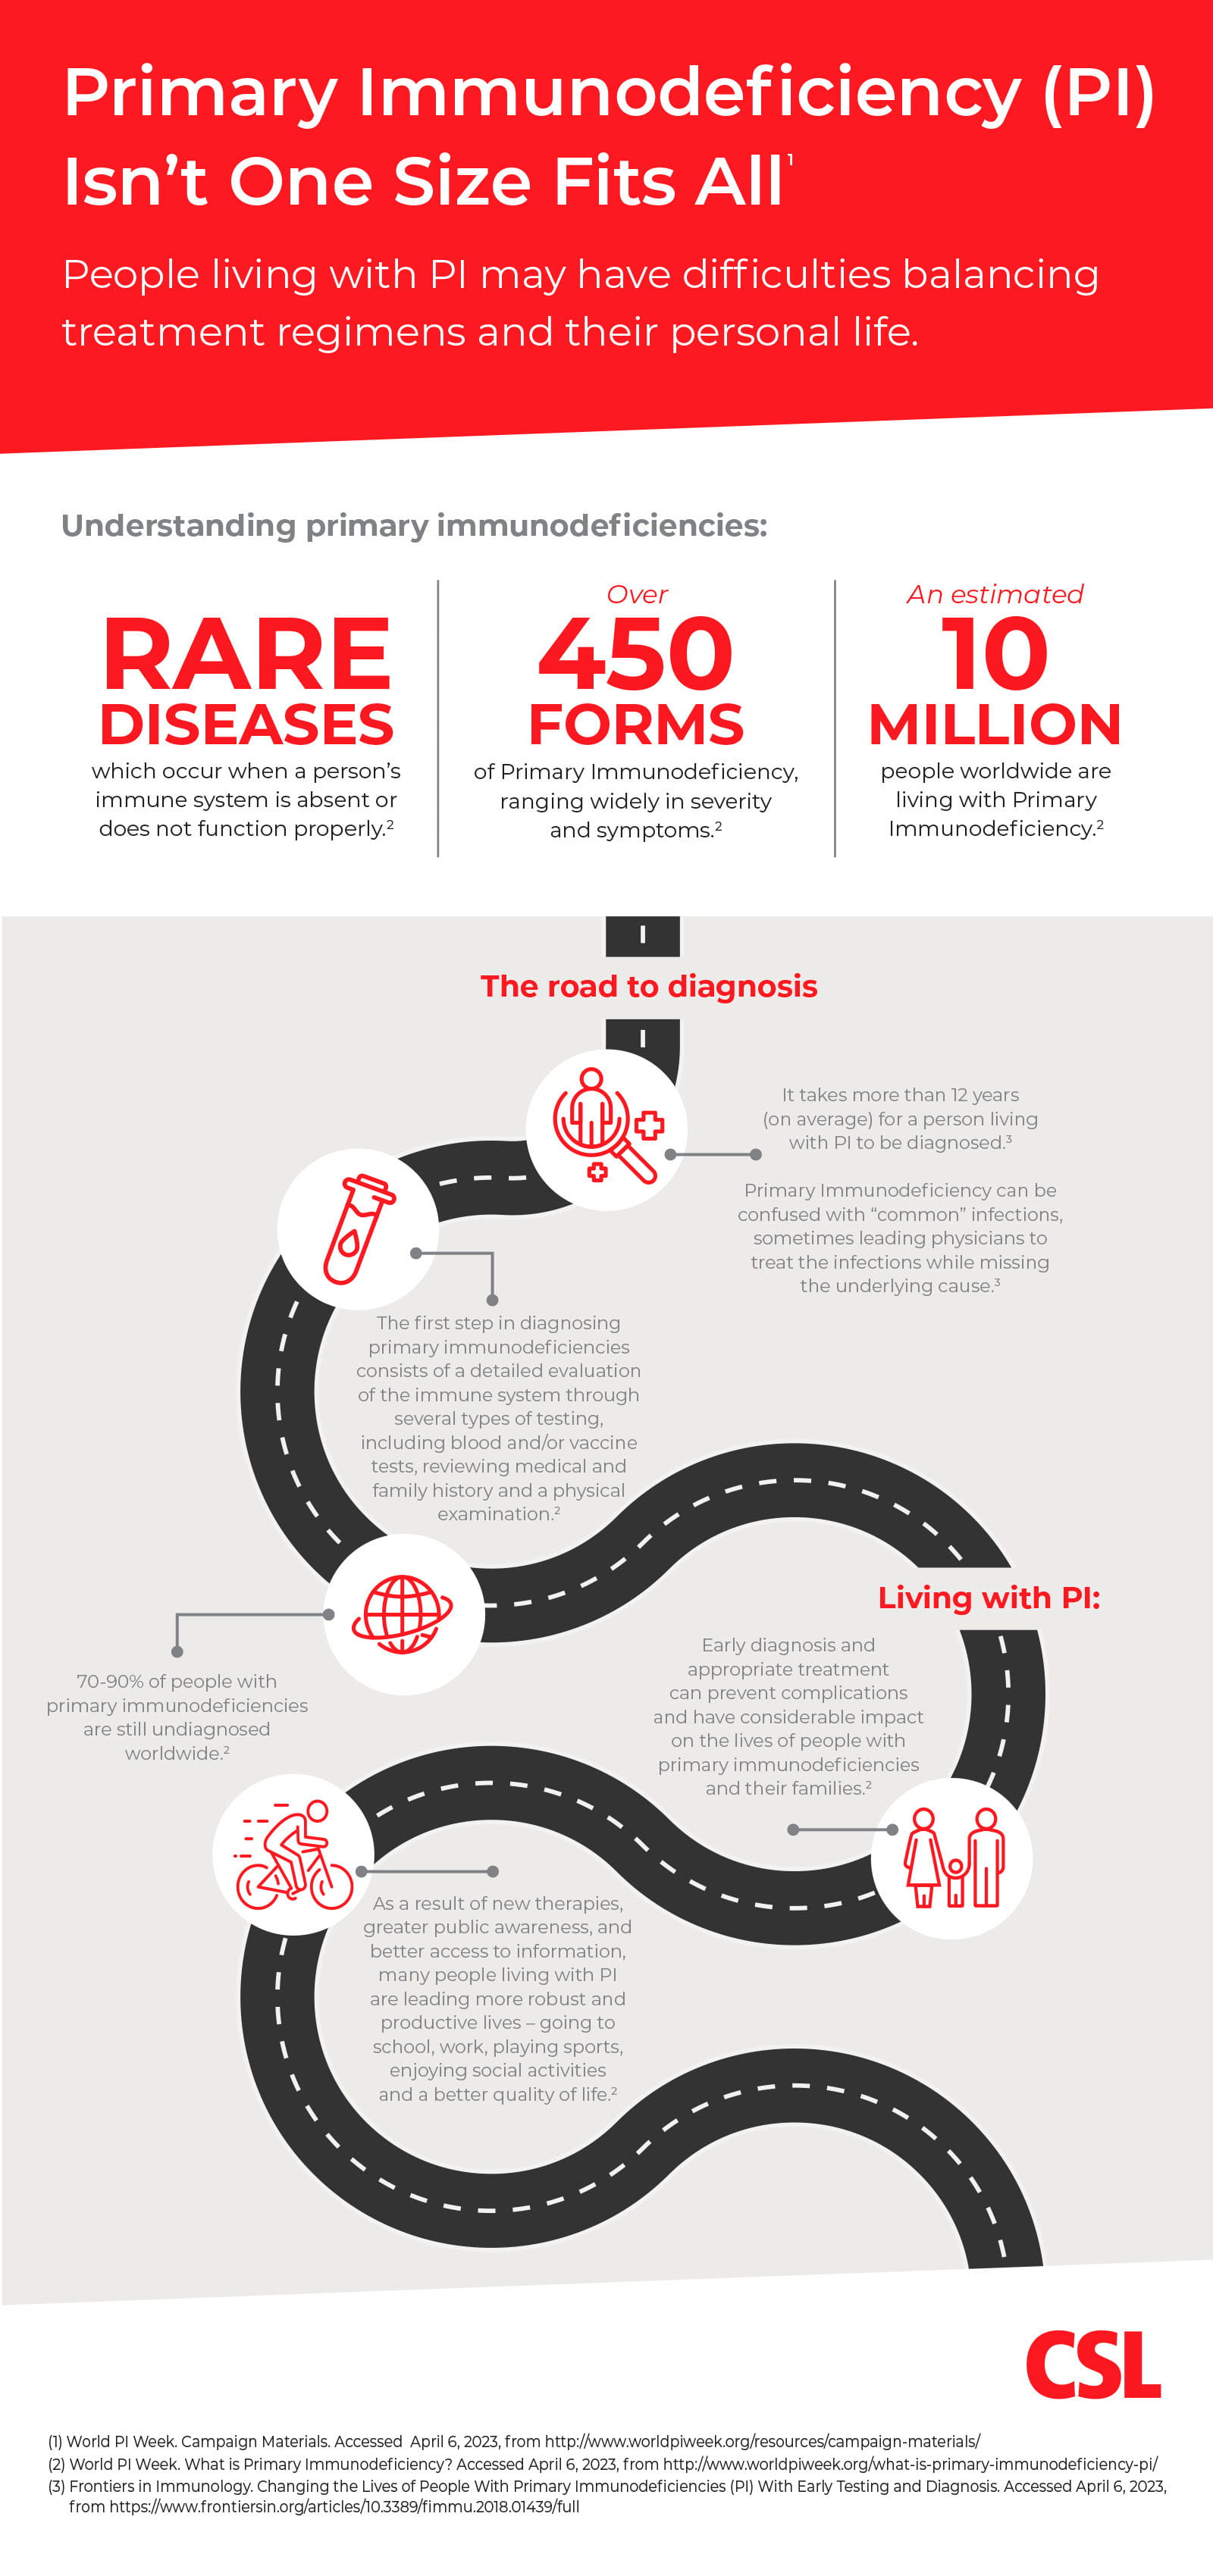 Infographic about primary immunodeficiency, including facts such as there are 450+ forms of PI and an estimated 10 million worldwide living with the condition.